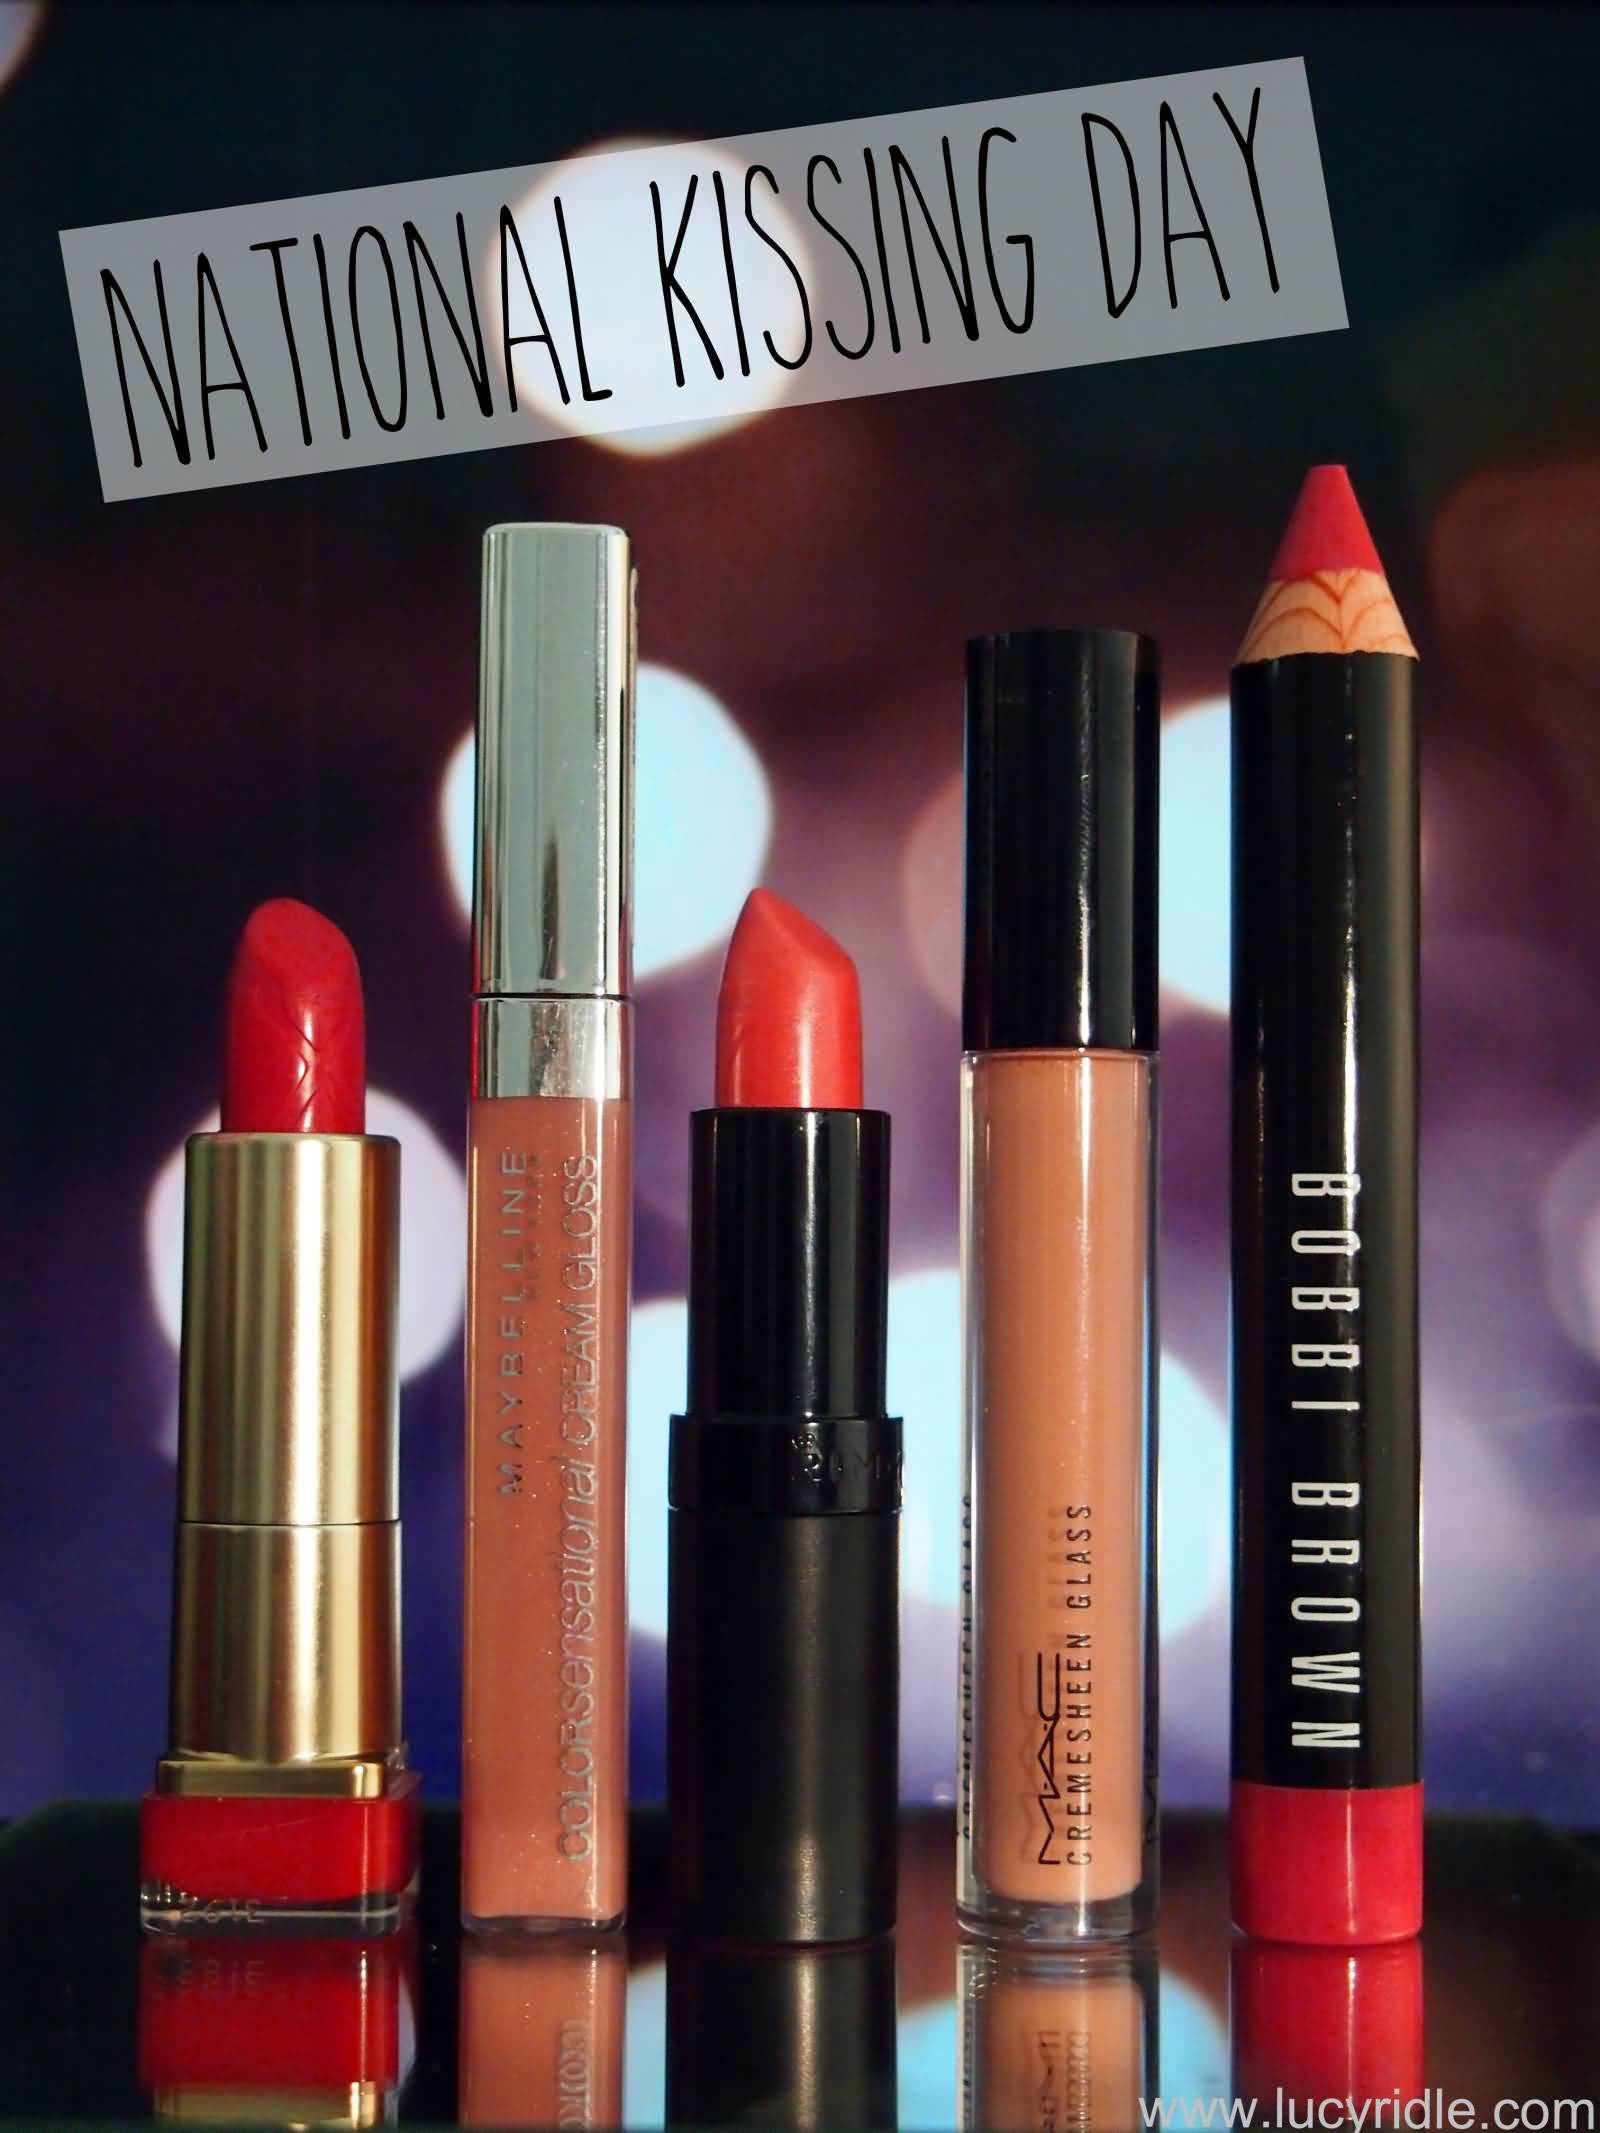 National Kissing Day Lipsticks Picture